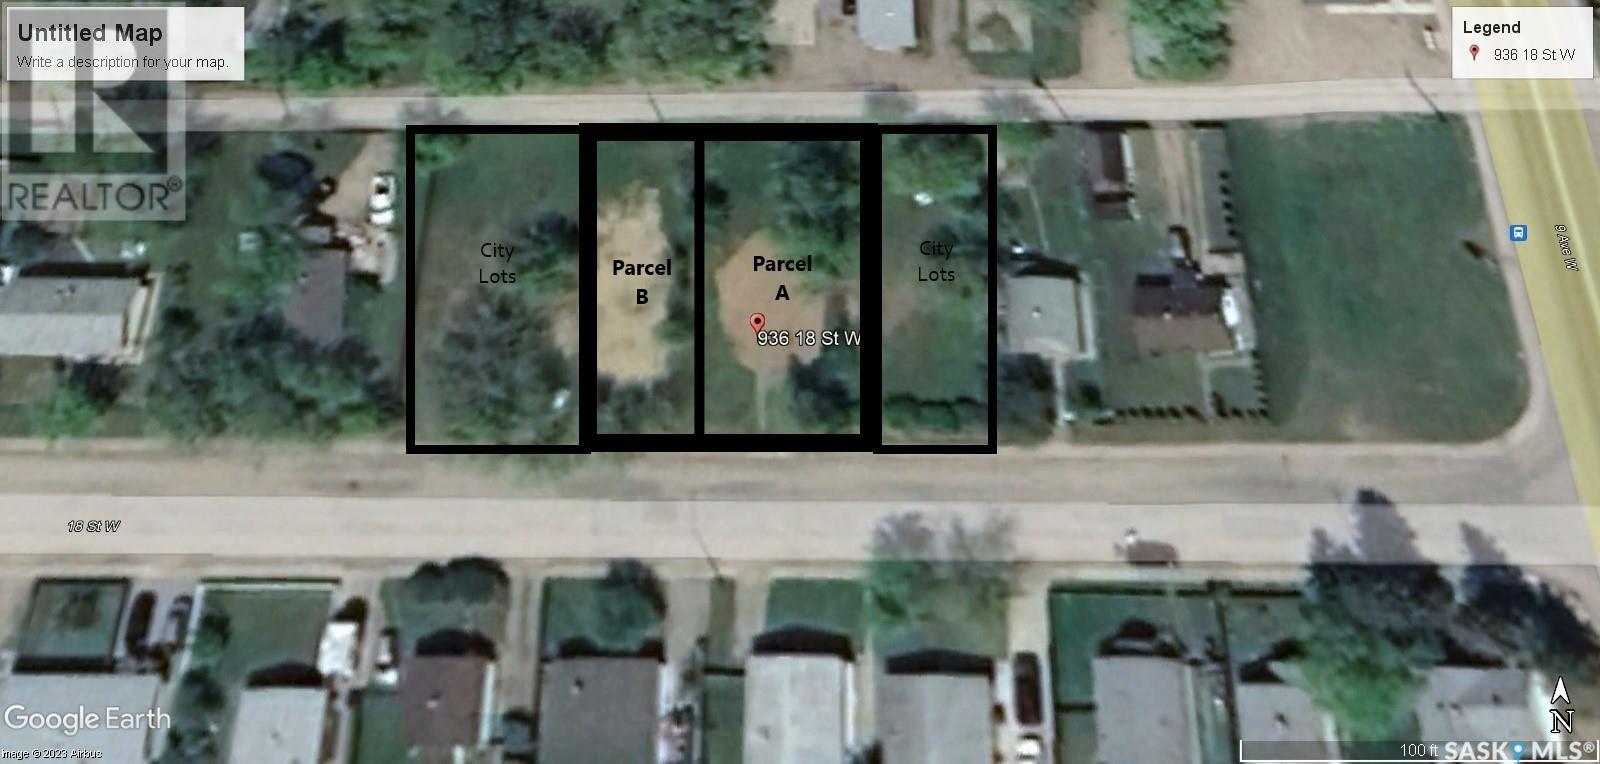 Vacant Land For Sale | 936 18th Street W | Prince Albert | S6V3Y8